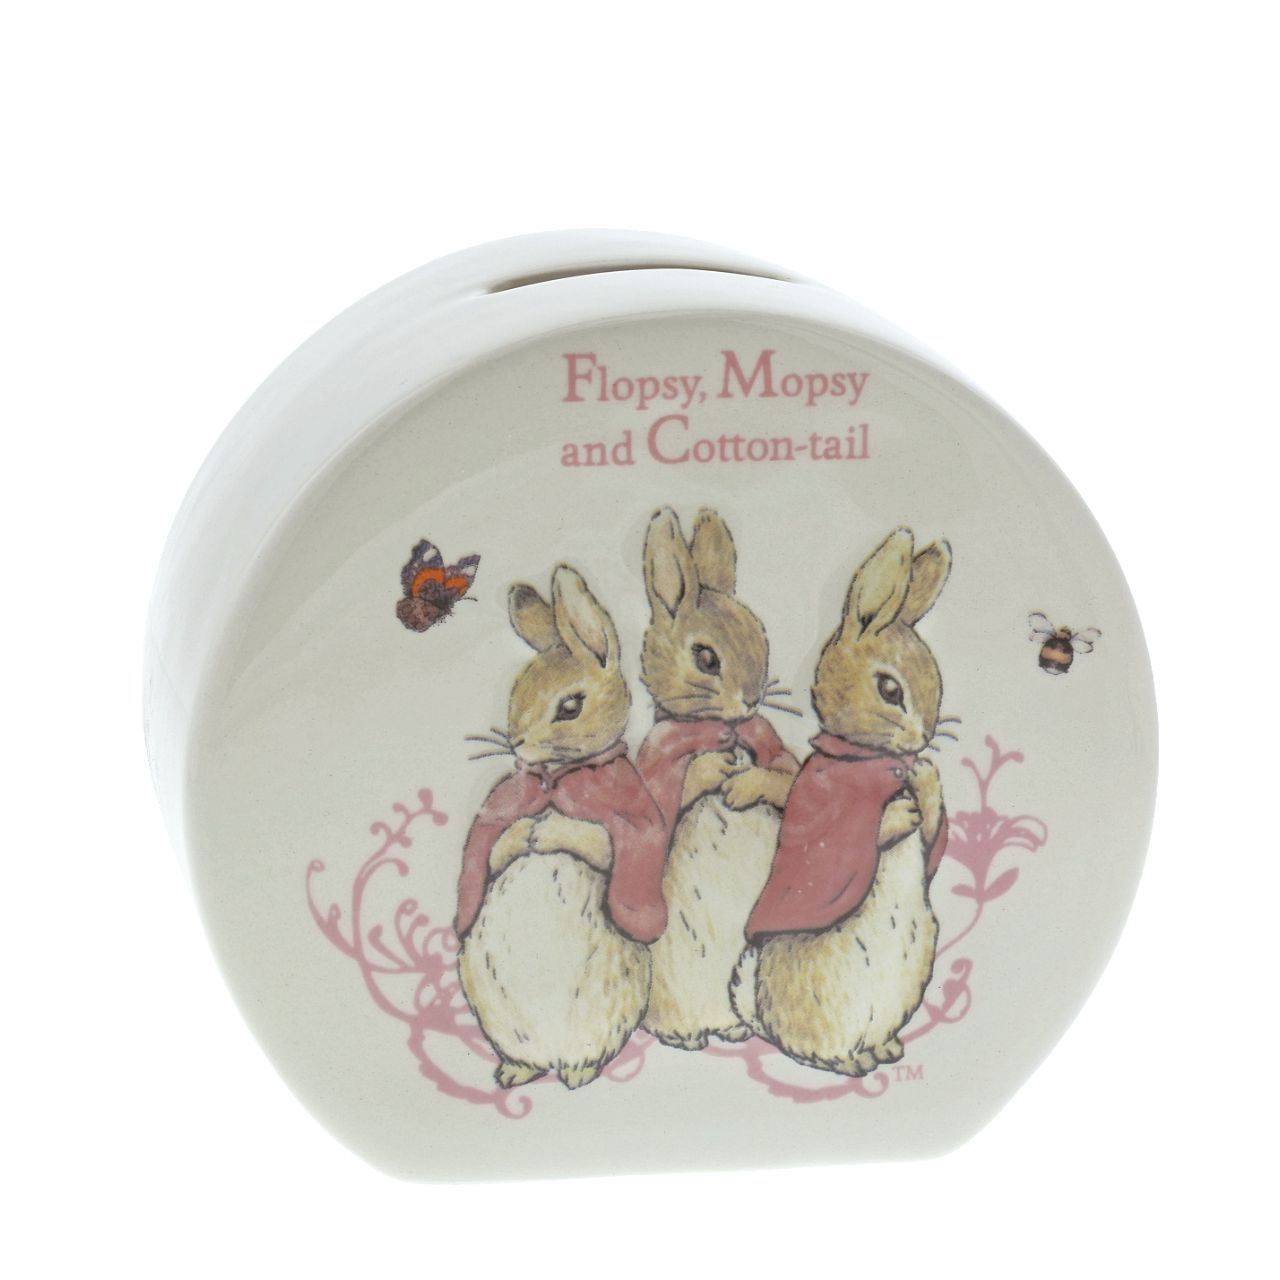 Beatrix Potter Flopsy, Mopsy & Cotton-tail Money Bank  The artwork for each product is taken from the original illustrations from the Beatrix Potter stories. Material; Ceramic. Presented in a branded gift box. Not a toy or children's product. Intended for adults only.